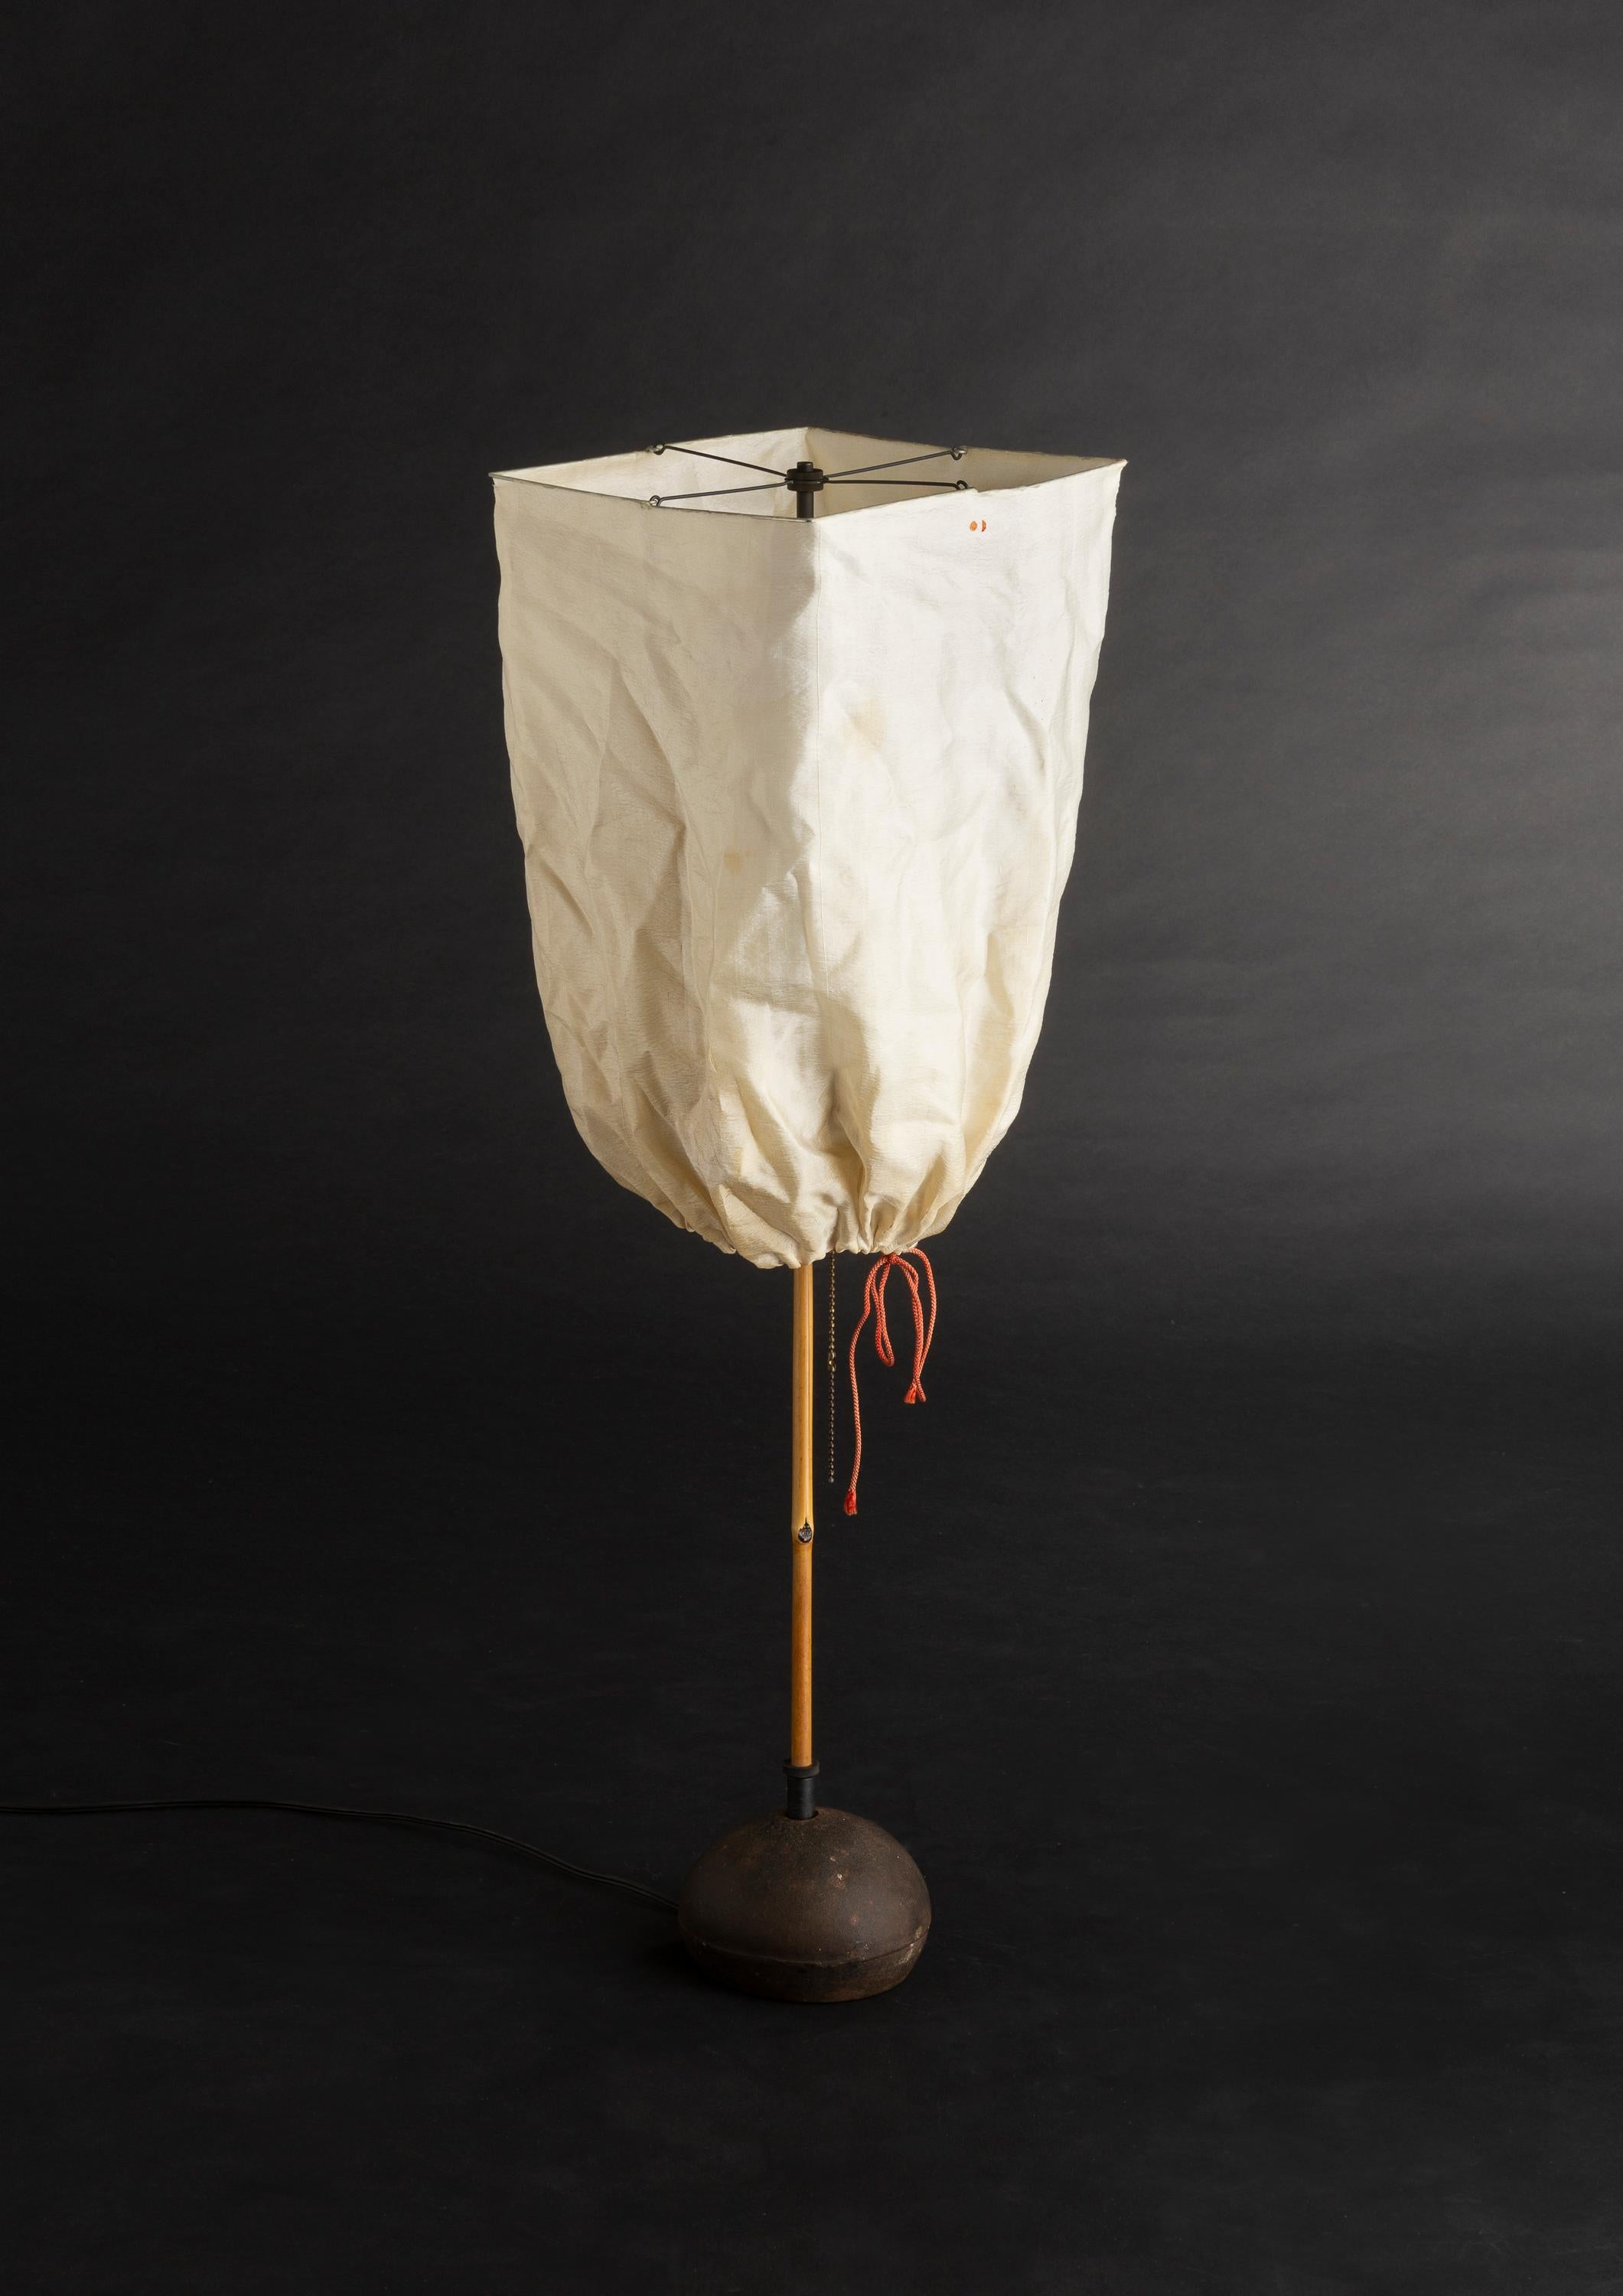 ISAMU NOGUCHI
Akari model “BB2-K1”
Original shade in silk & red string
Structure in black lacquered metal & pebble base in cast iron and bamboo stem
Hand-made form realized by Ozeki Company, Gifu, Japan
Series started in 1951
Height: 27 in. /